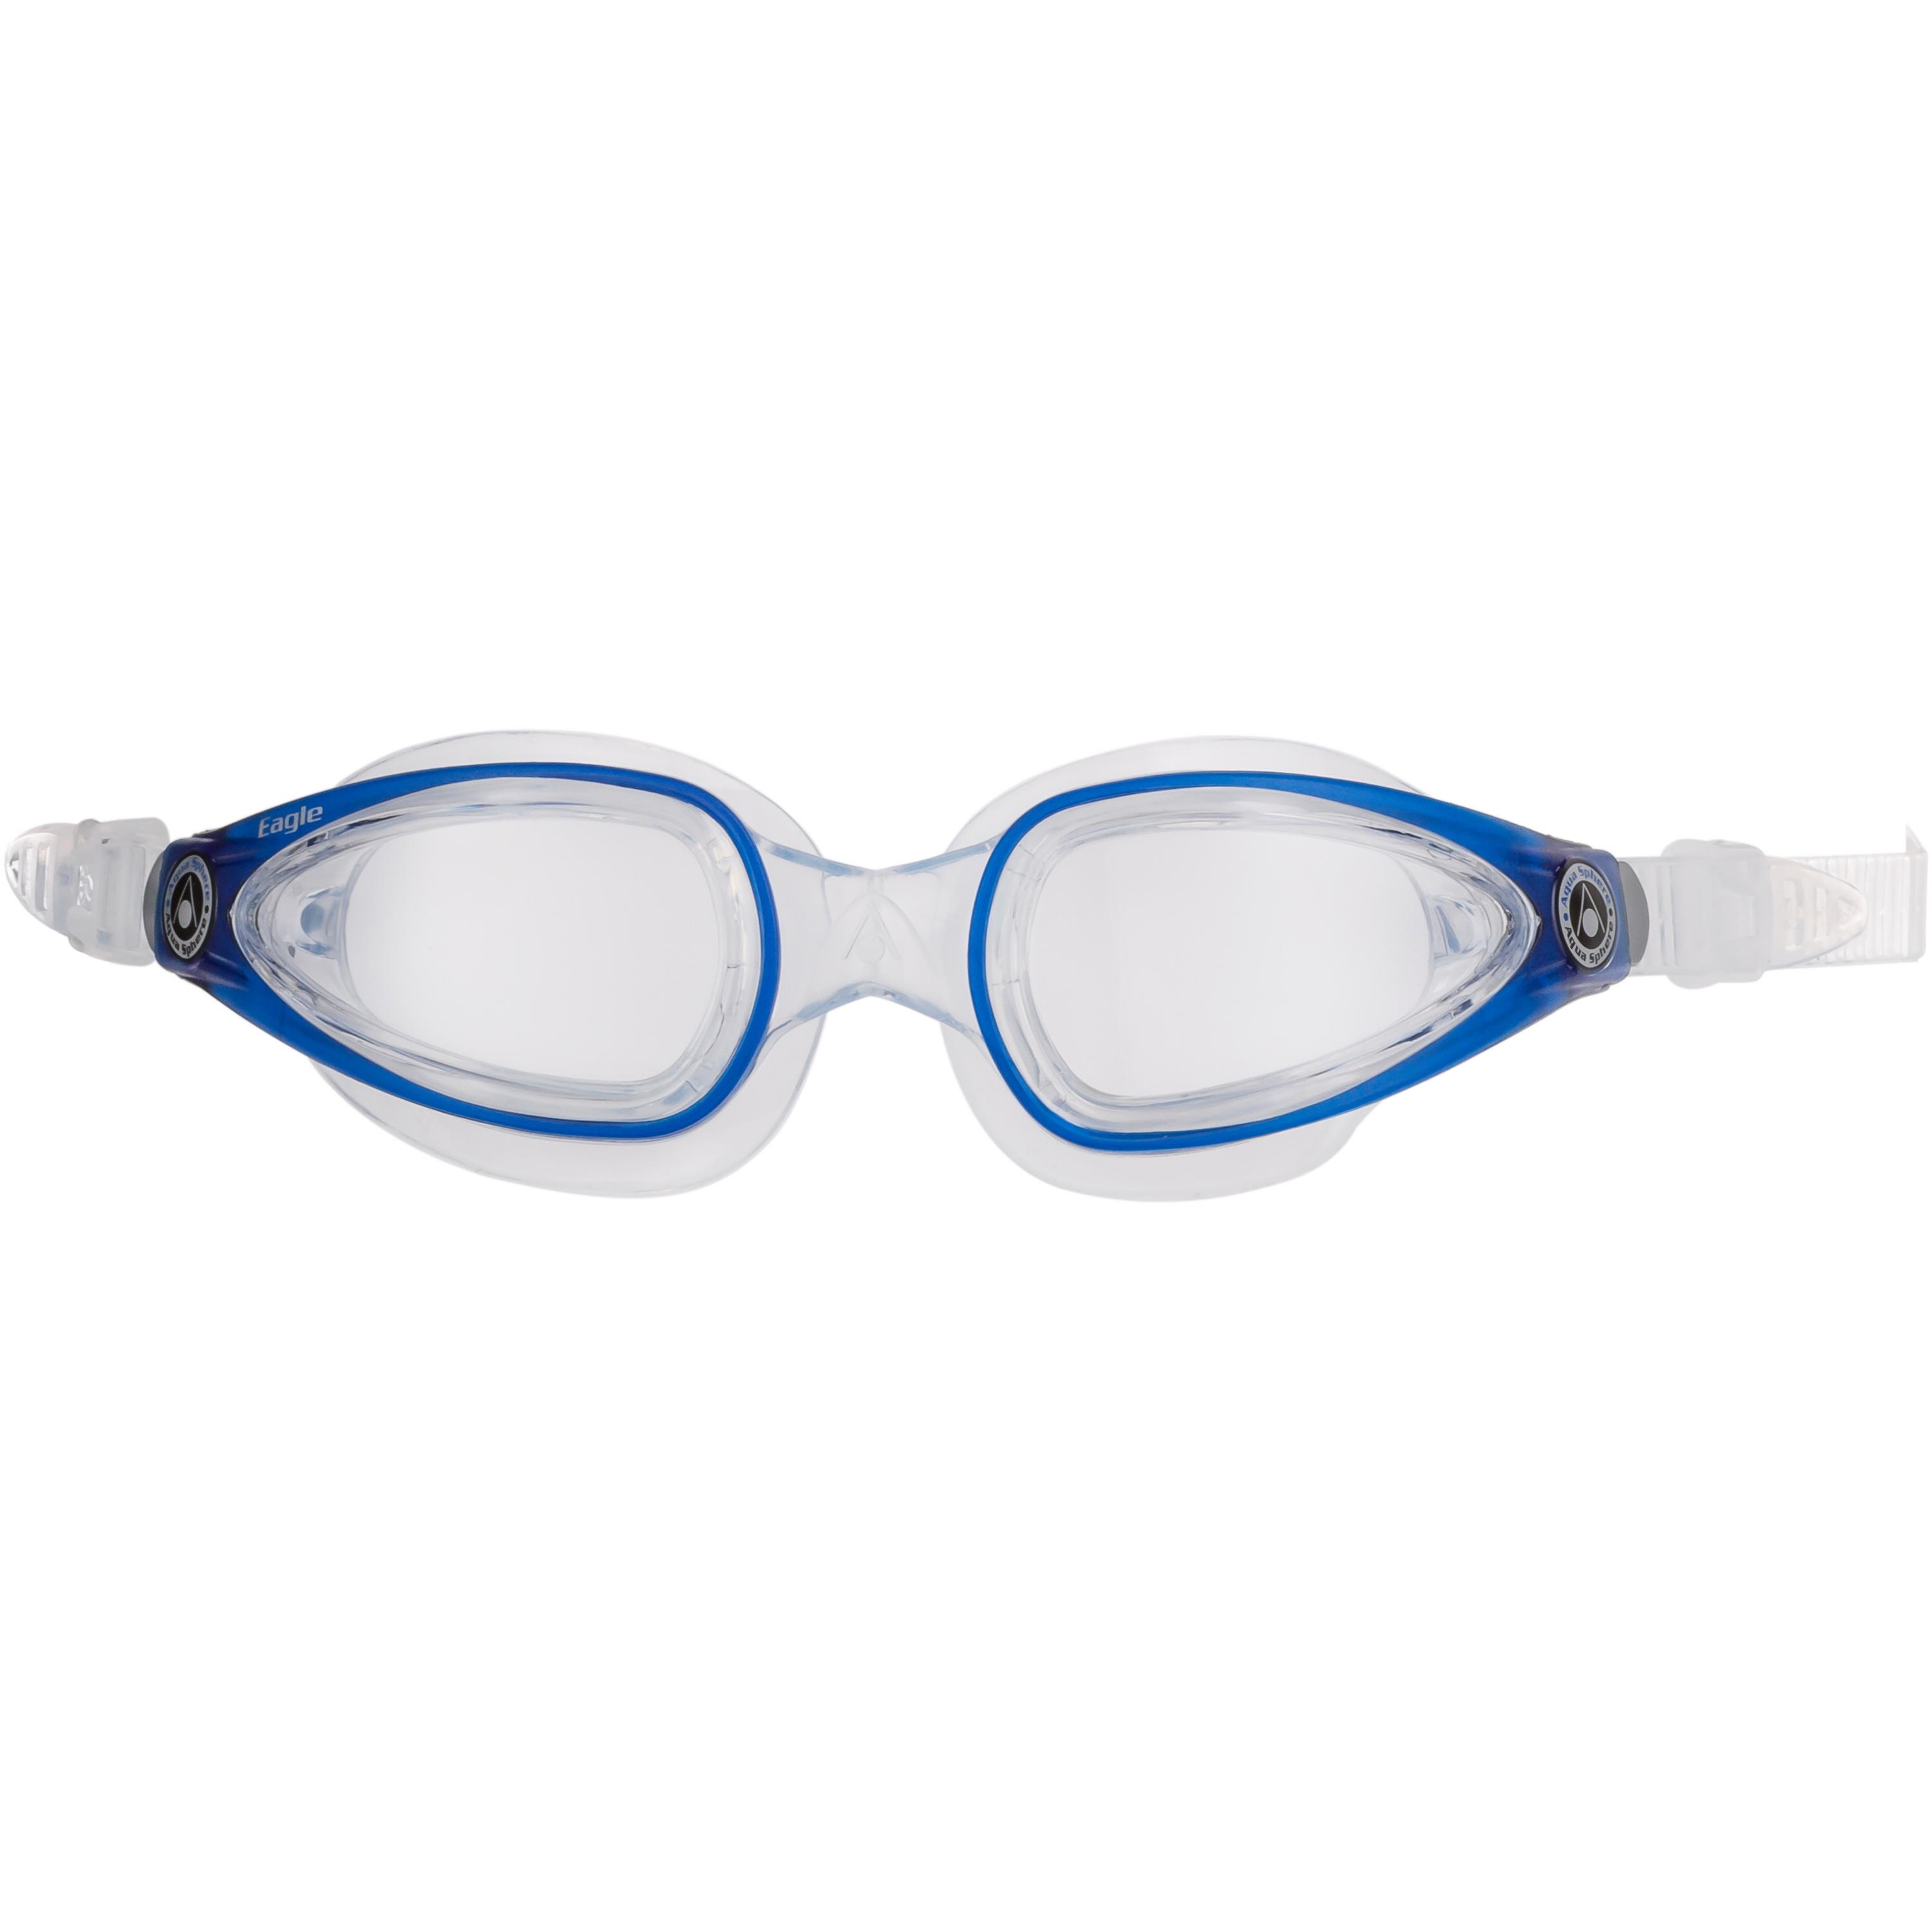 Image of Aquasphere Eagle Optic Schwimmbrille